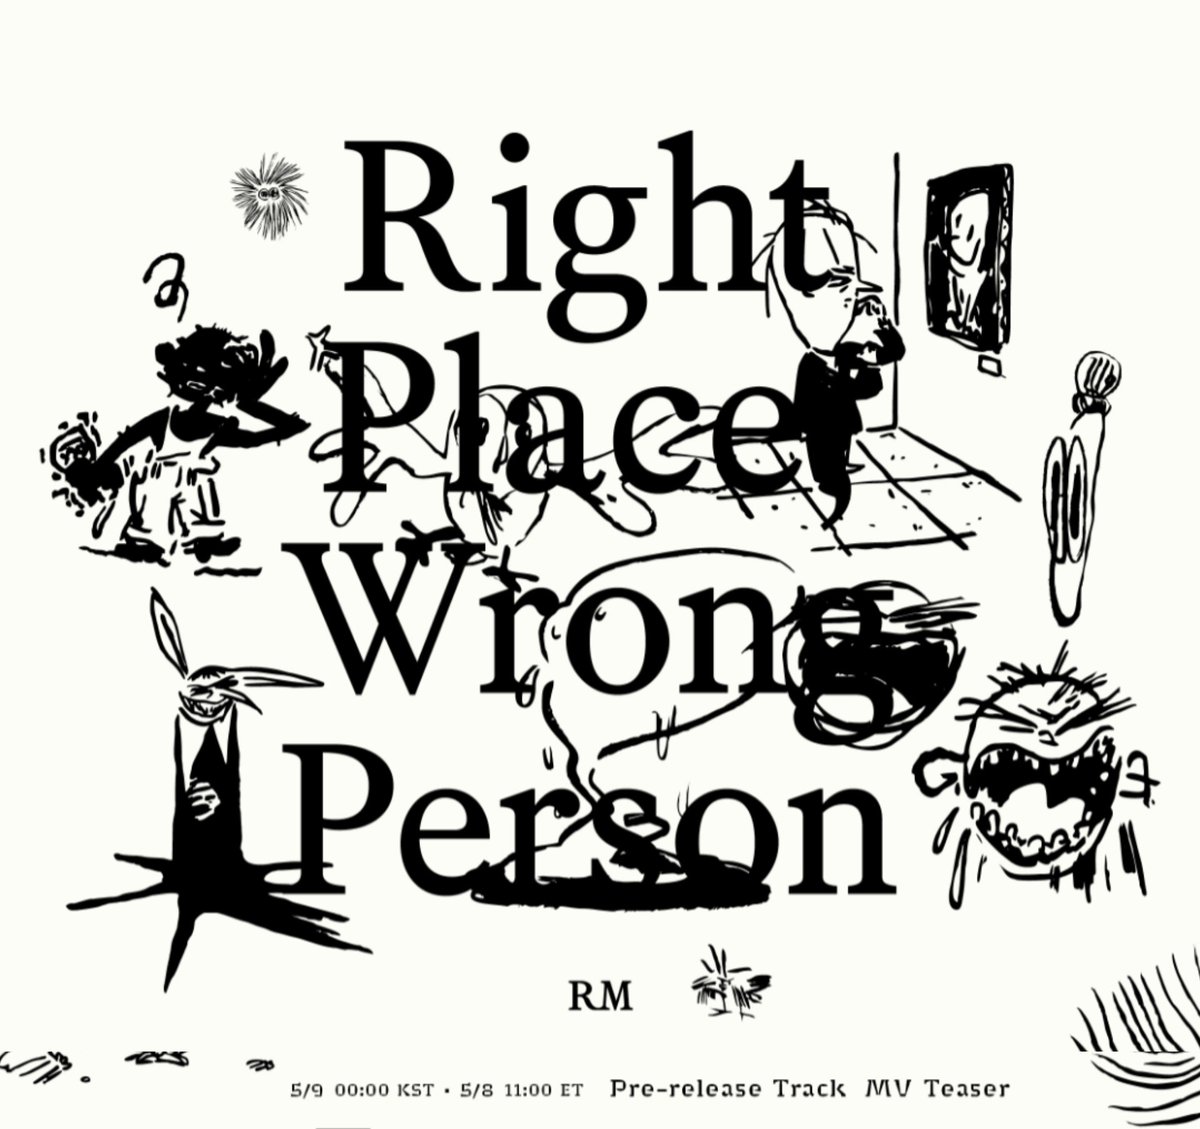 RM 'Right Place, Wrong Person' Promotion Schedule : 

📌  Pre-release Track MV Teaser
🗓️  8 Mei 2024 | 22.00 WIB 

COME BACK TO ME BY RM
COME BACK TO ME TEASER
COME BACK TO ME IS COMING
RIGHT PLACE WRONG PERSON
#Comebacktome #Comebacktome_D1
#RM #RightPlaceWrongPerson